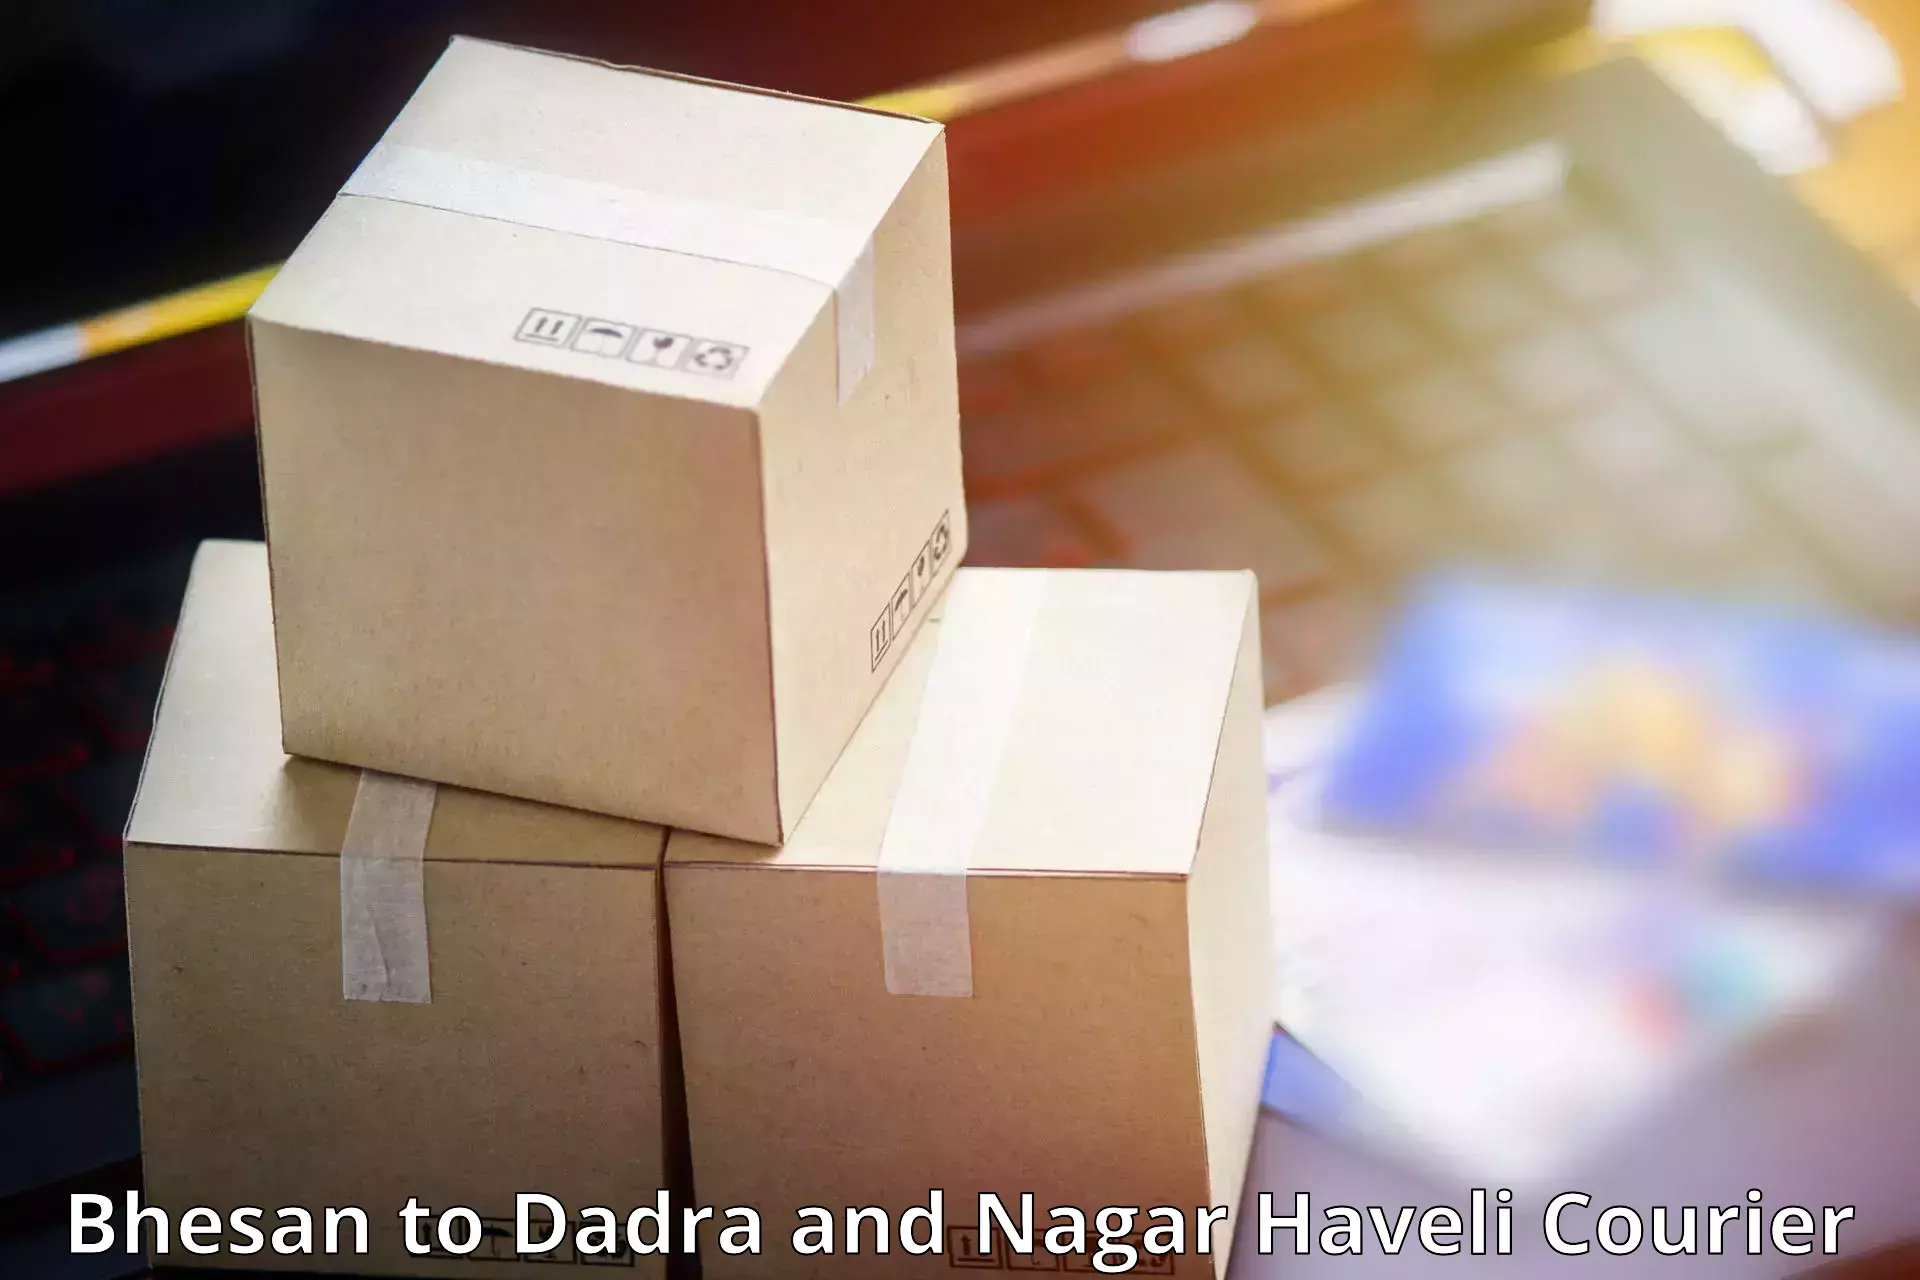 Local delivery service Bhesan to Dadra and Nagar Haveli